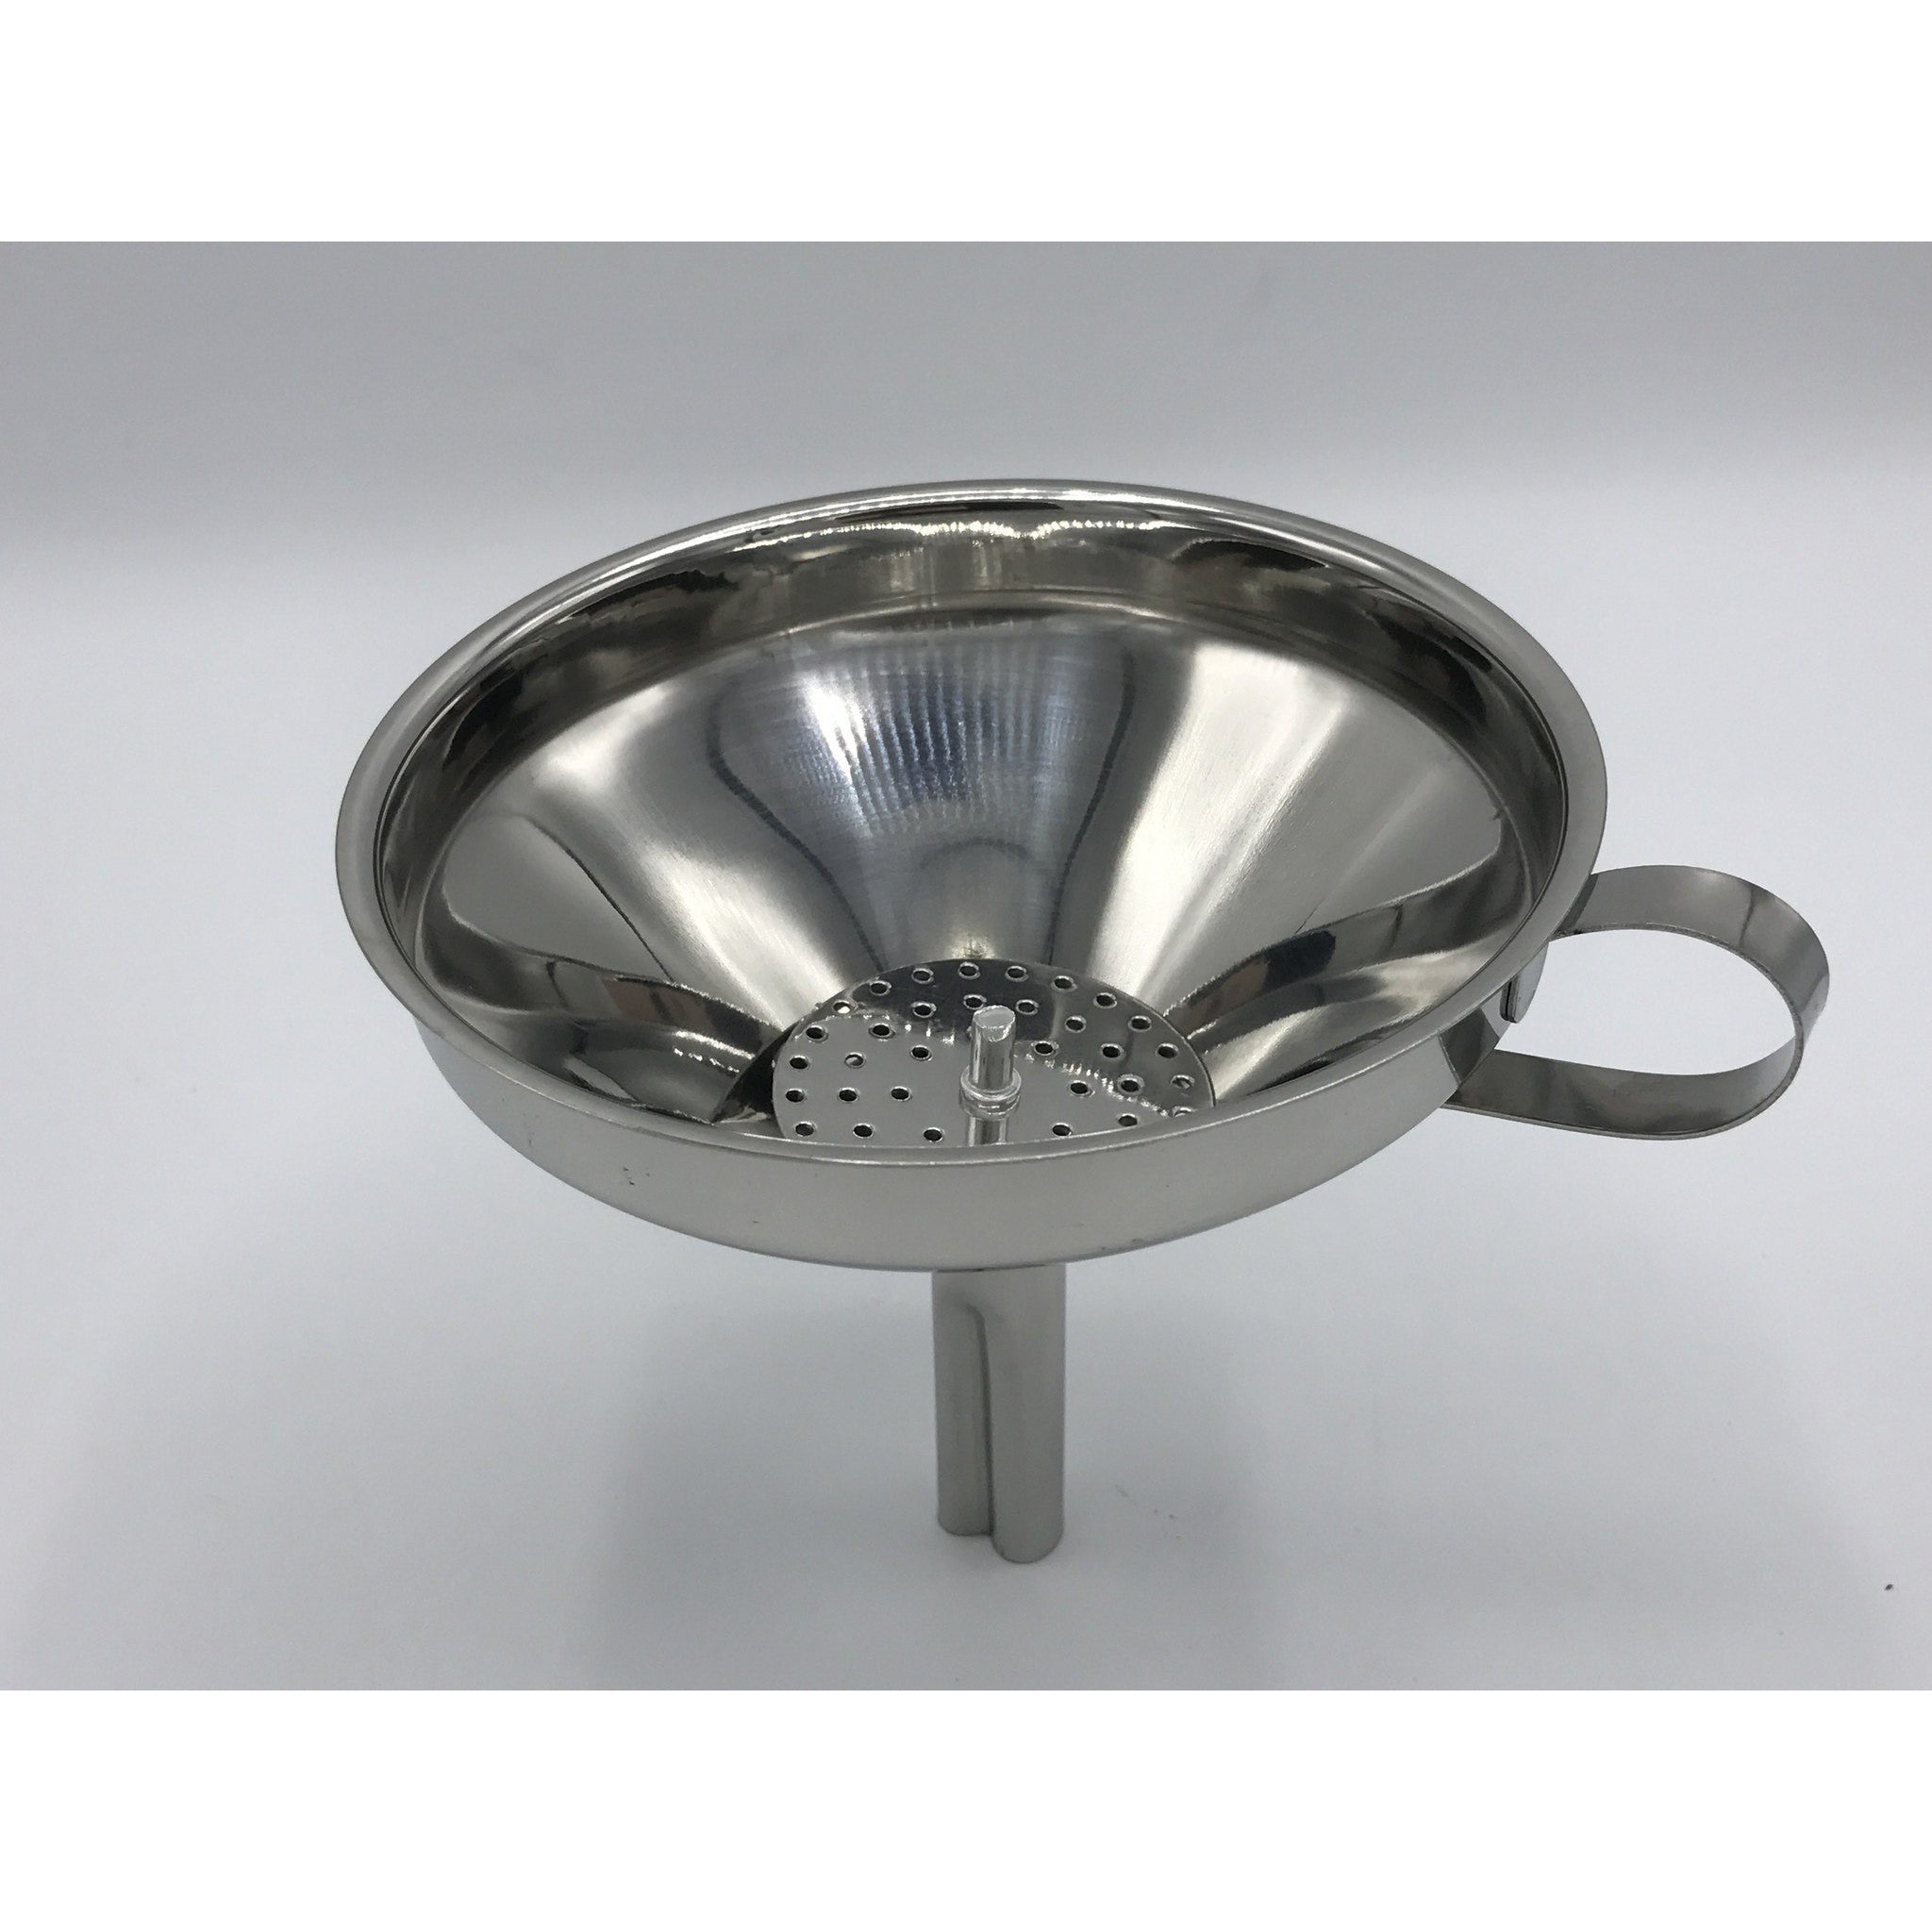 Stainless Steel Funnel with removable strainer - Icy-sky ...